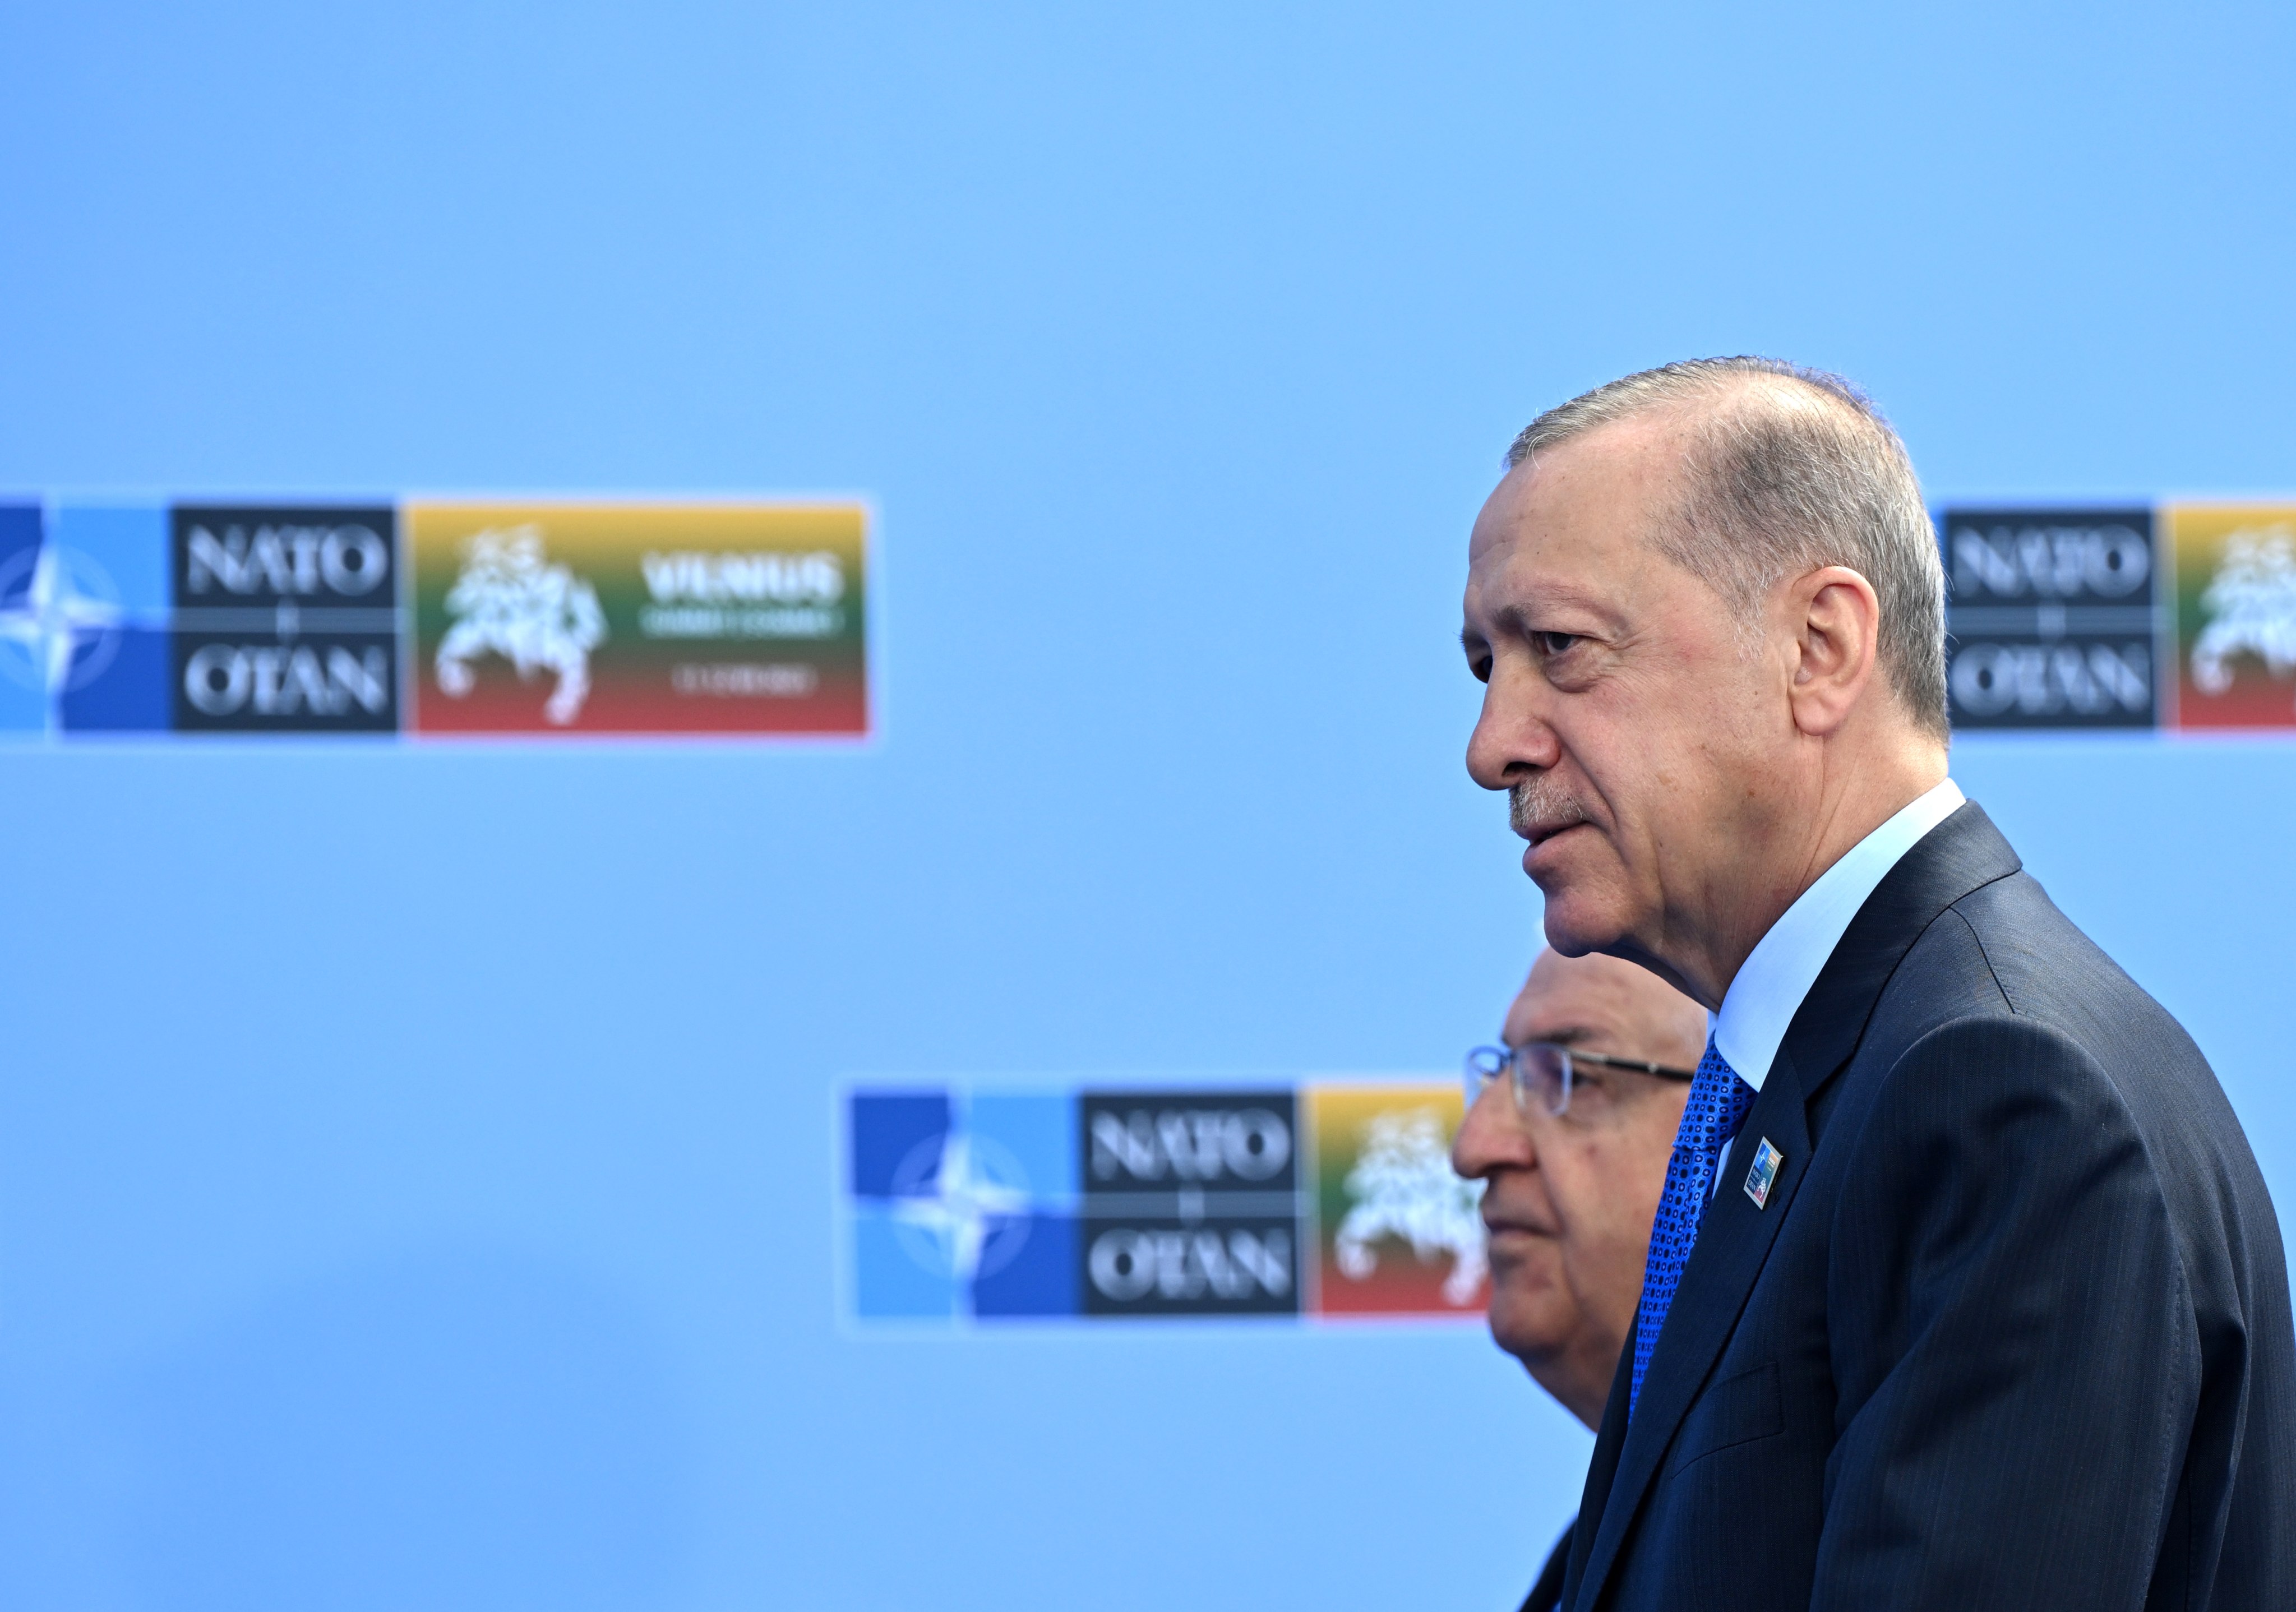 Turkey’s President Recep Tayyip Erdogan arrives to attend the Nato summit in Vilnius, Lithuania, on July 11. Turkey has used Sweden’s membership in Nato as a bargaining chip to support its own aspirations of being admitted to the European Union. Photo: EPA-EFE